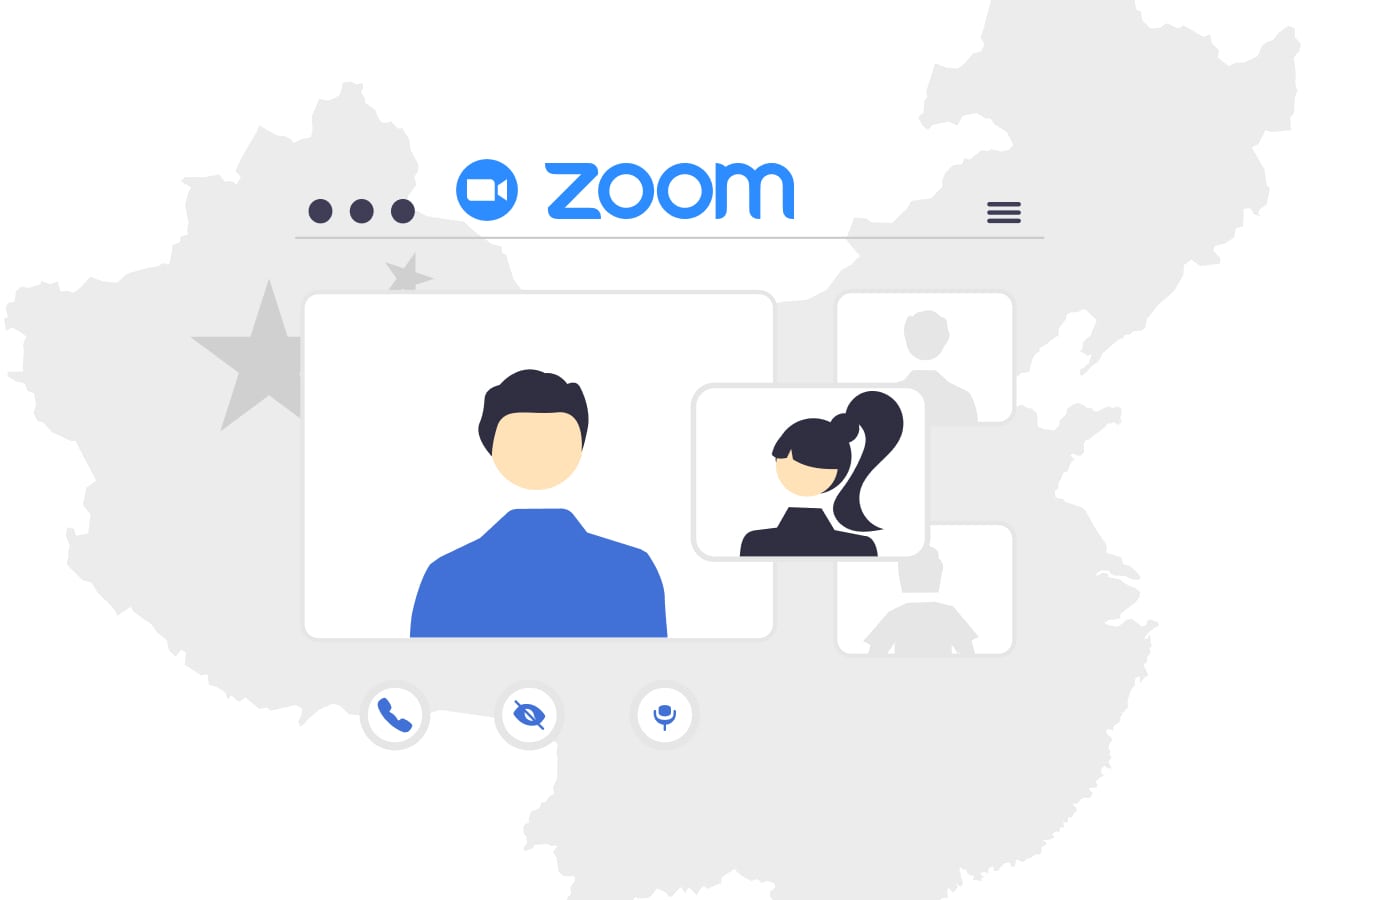 Does Zoom work in China?